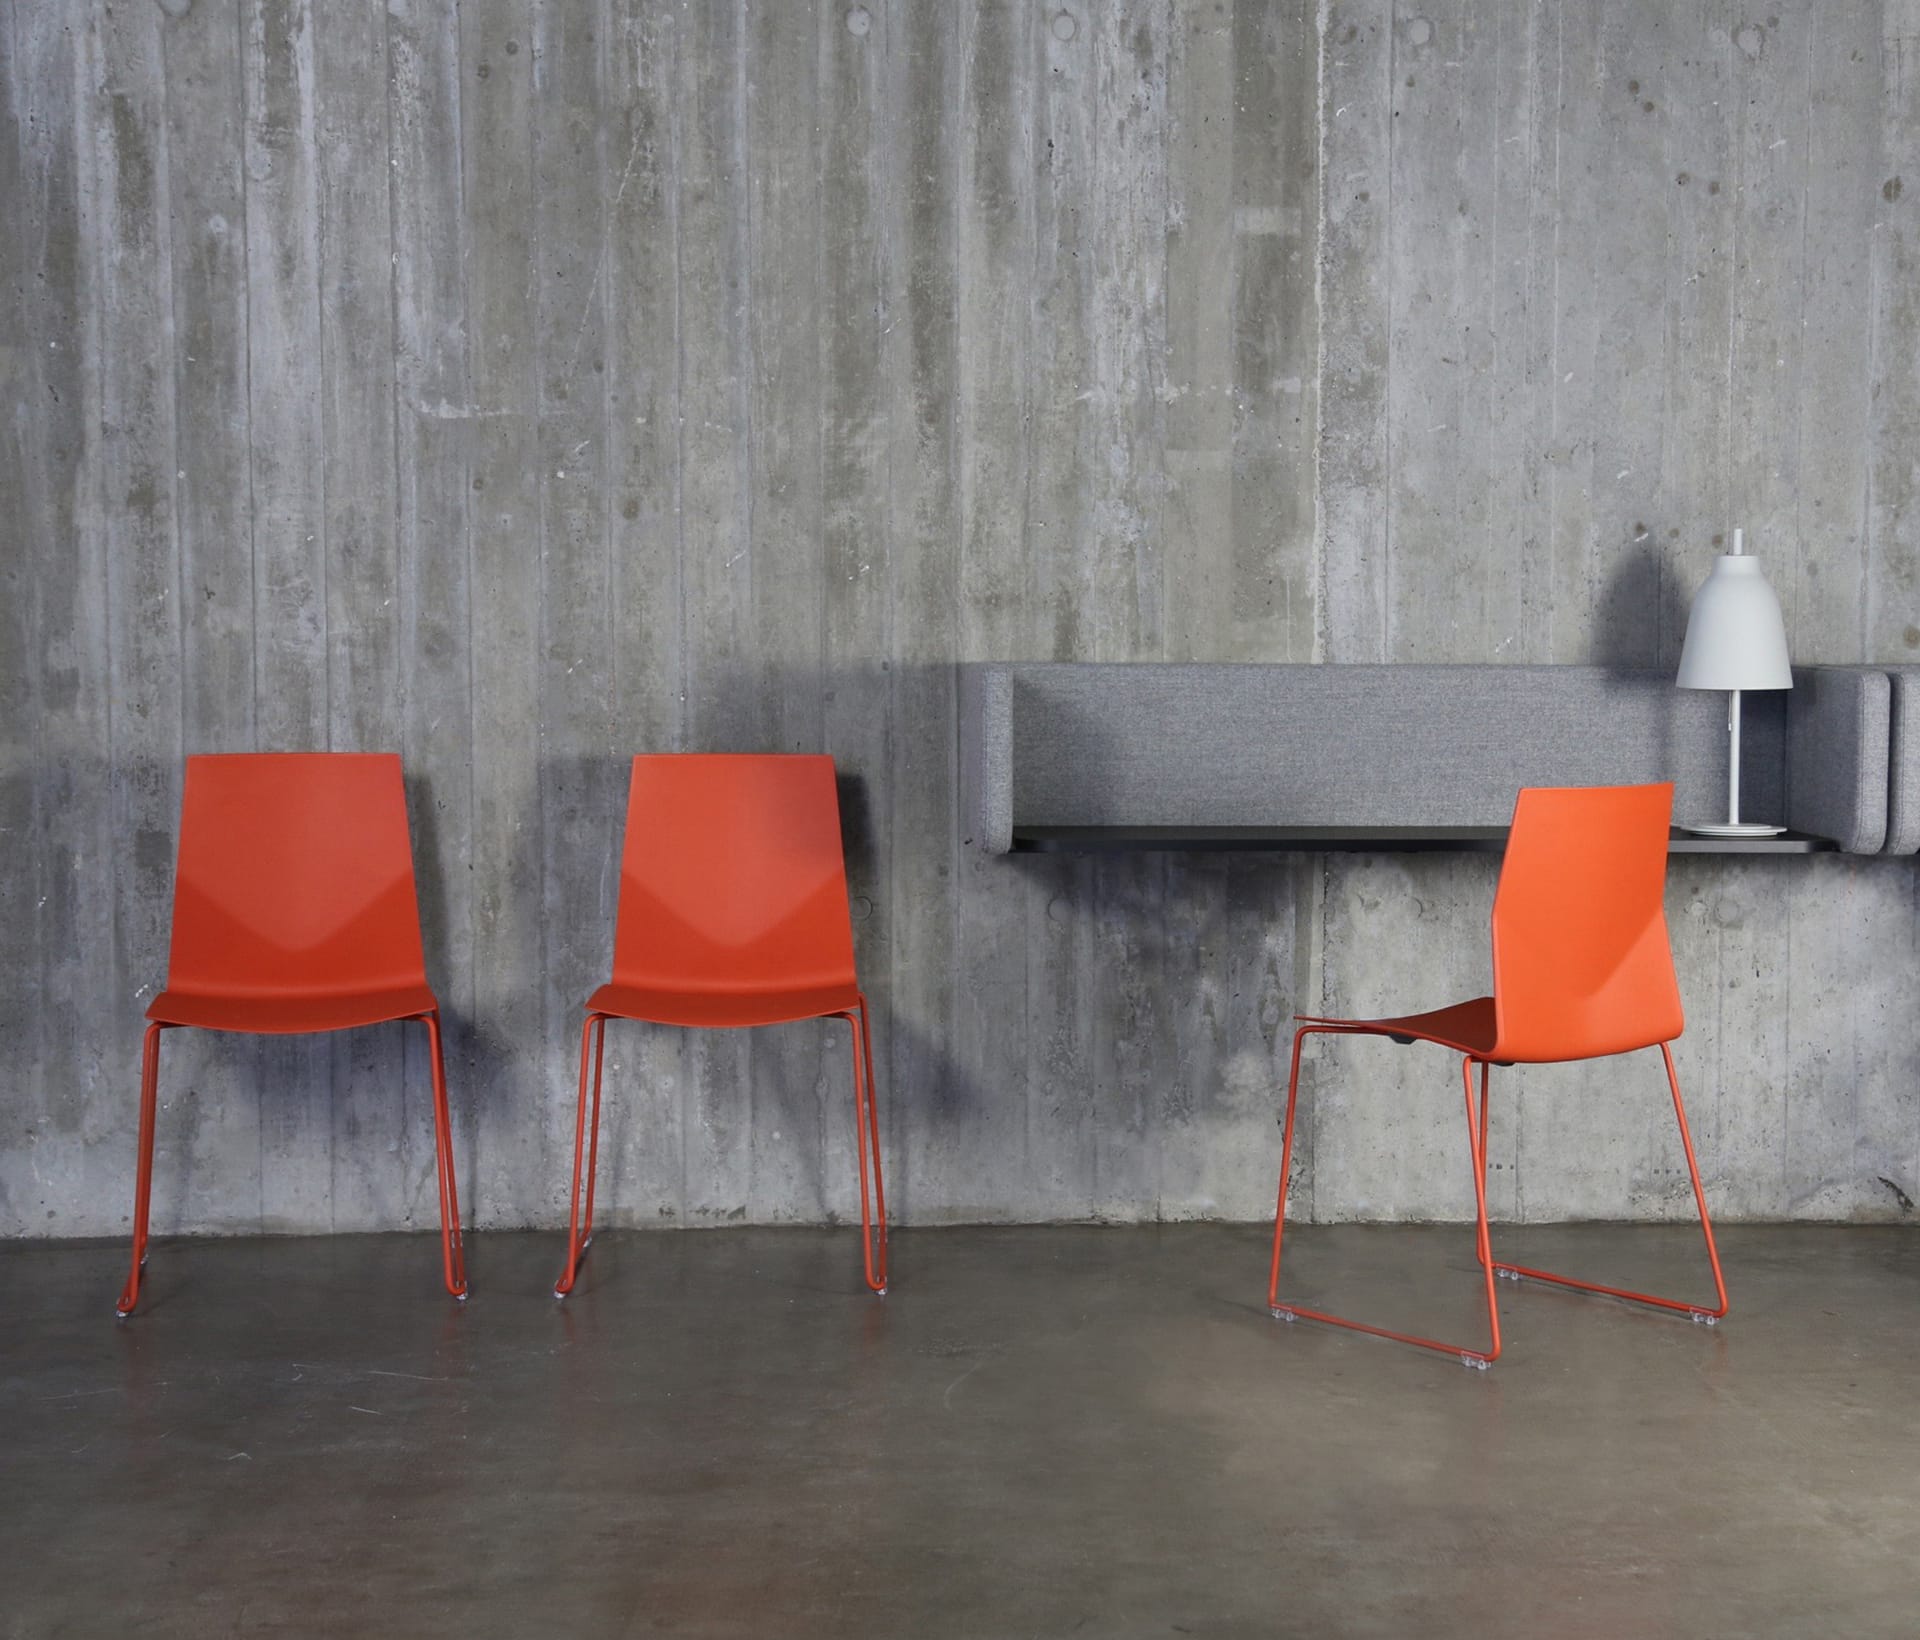 Three orange chairs in front of a concrete wall.